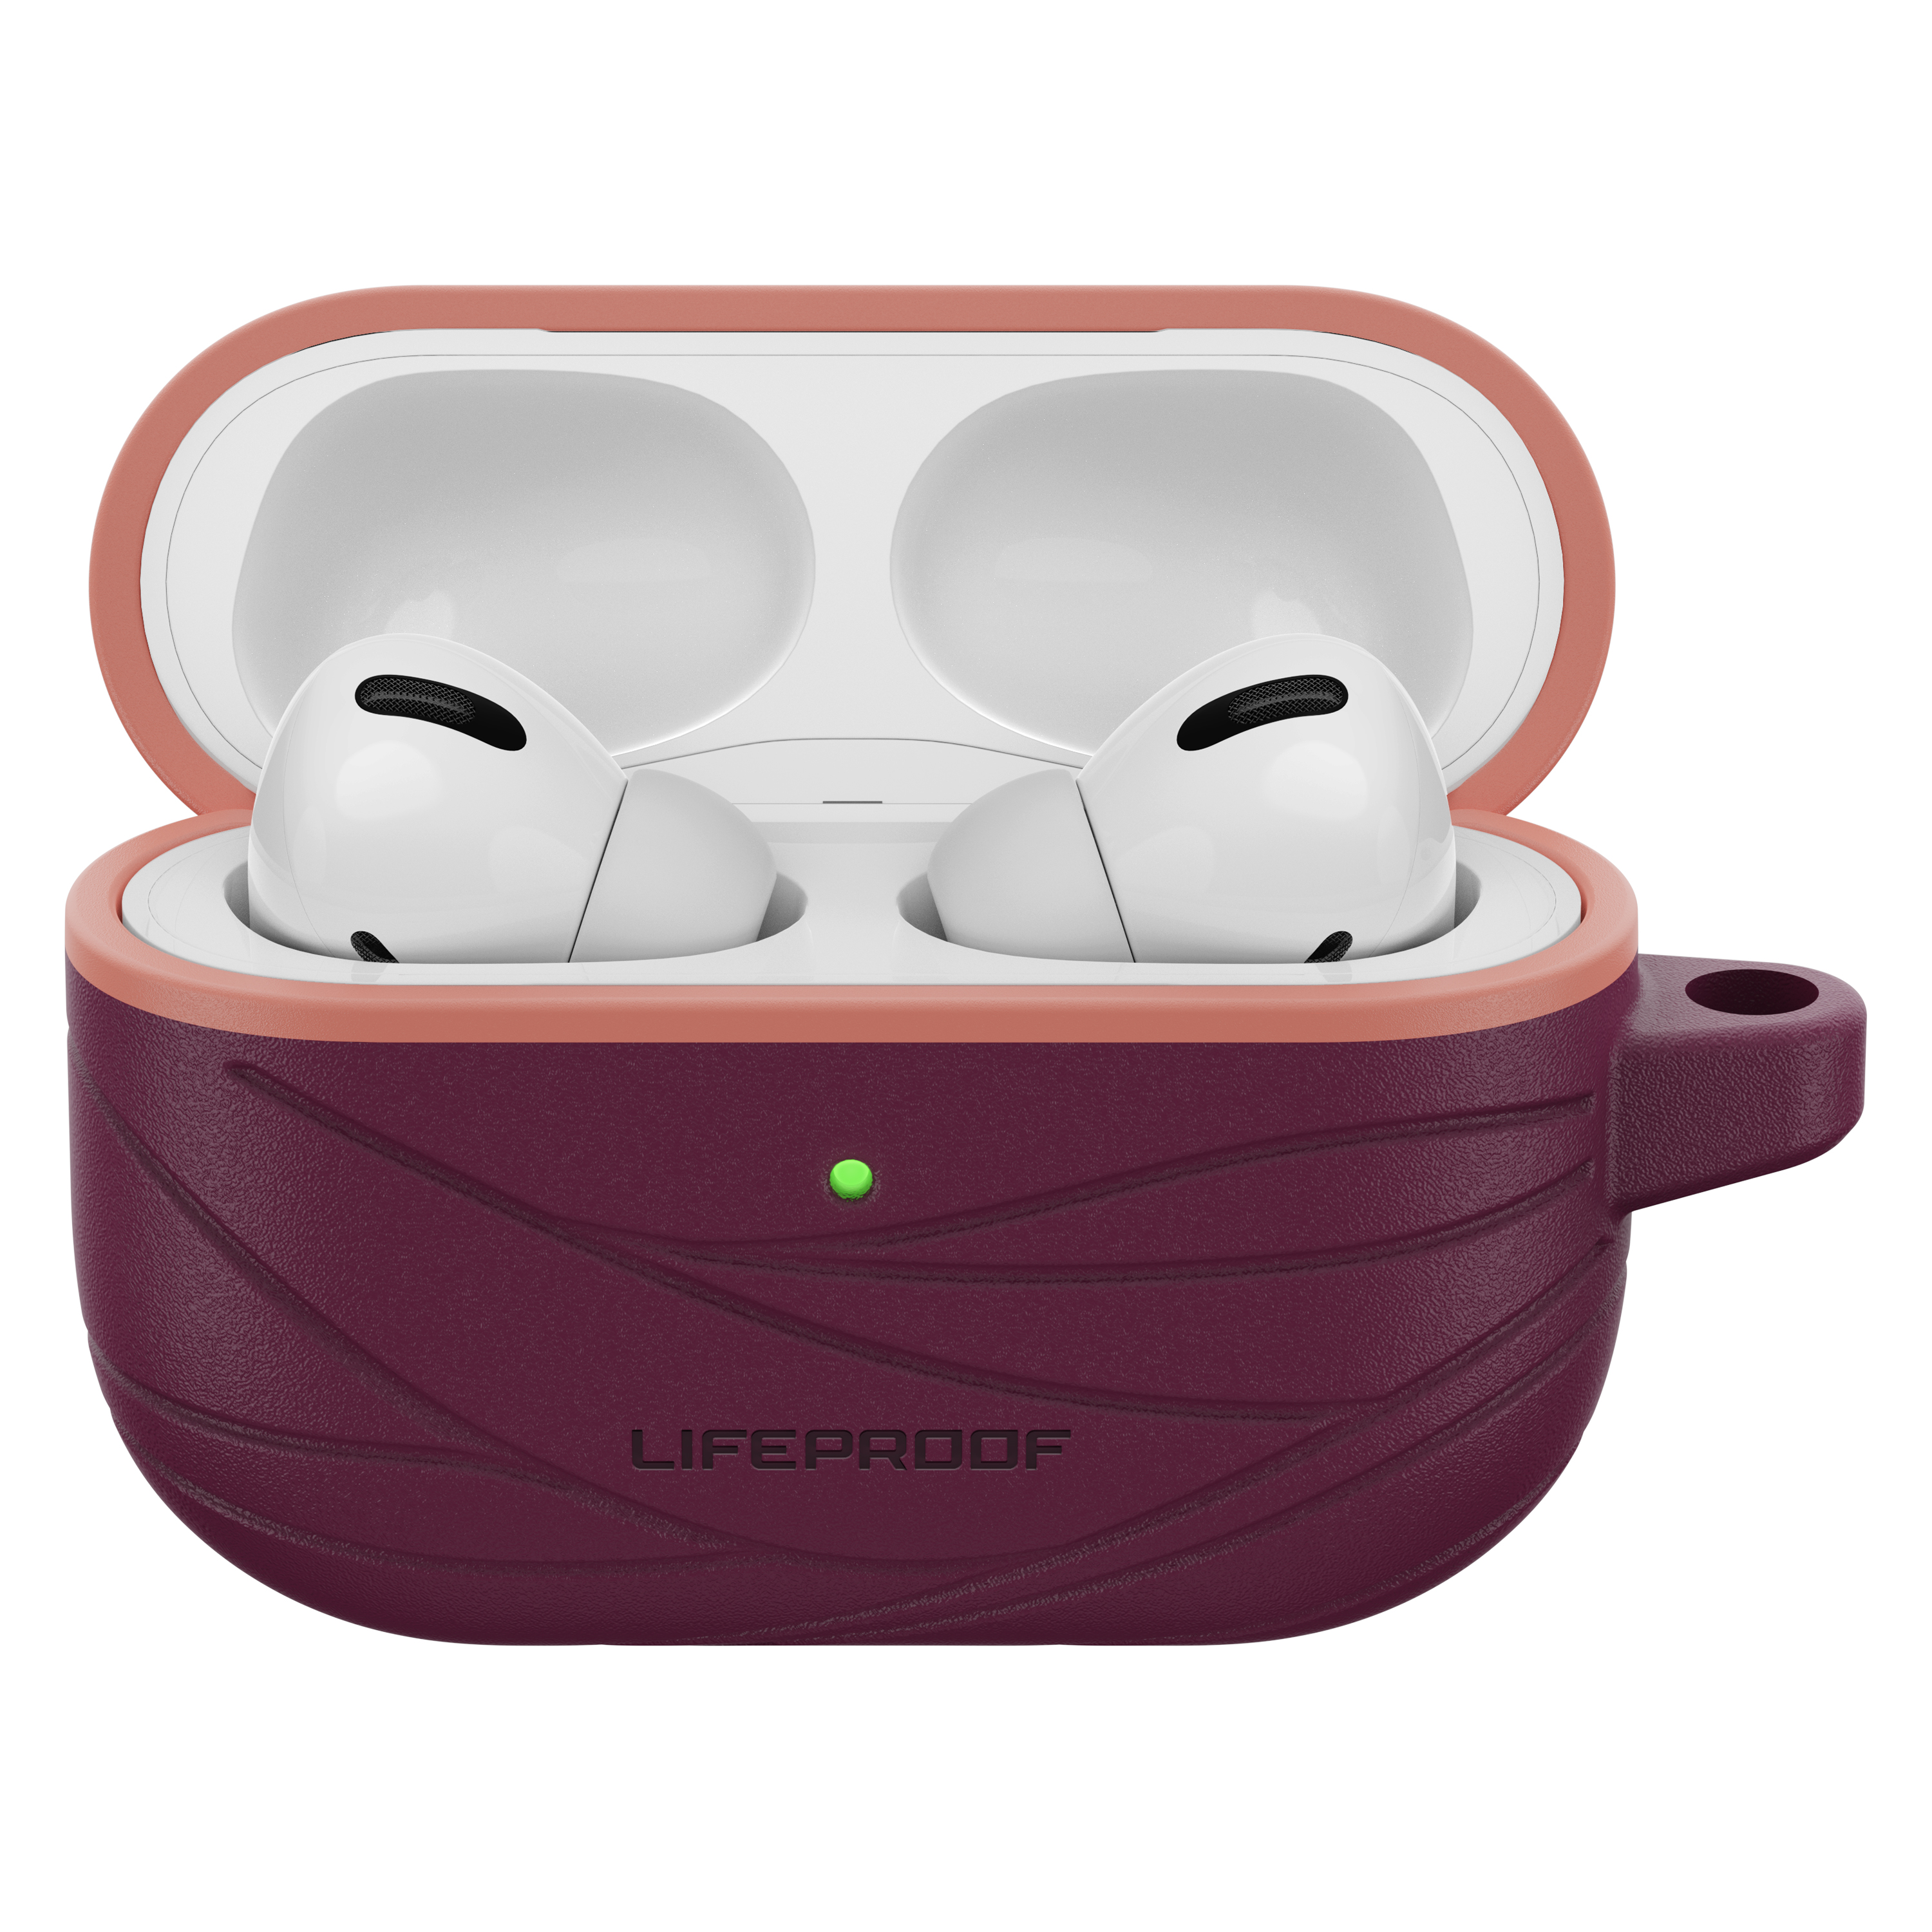 Apple AirPods Pro inkl. kabelloses Ladecase favorable buying at our shop